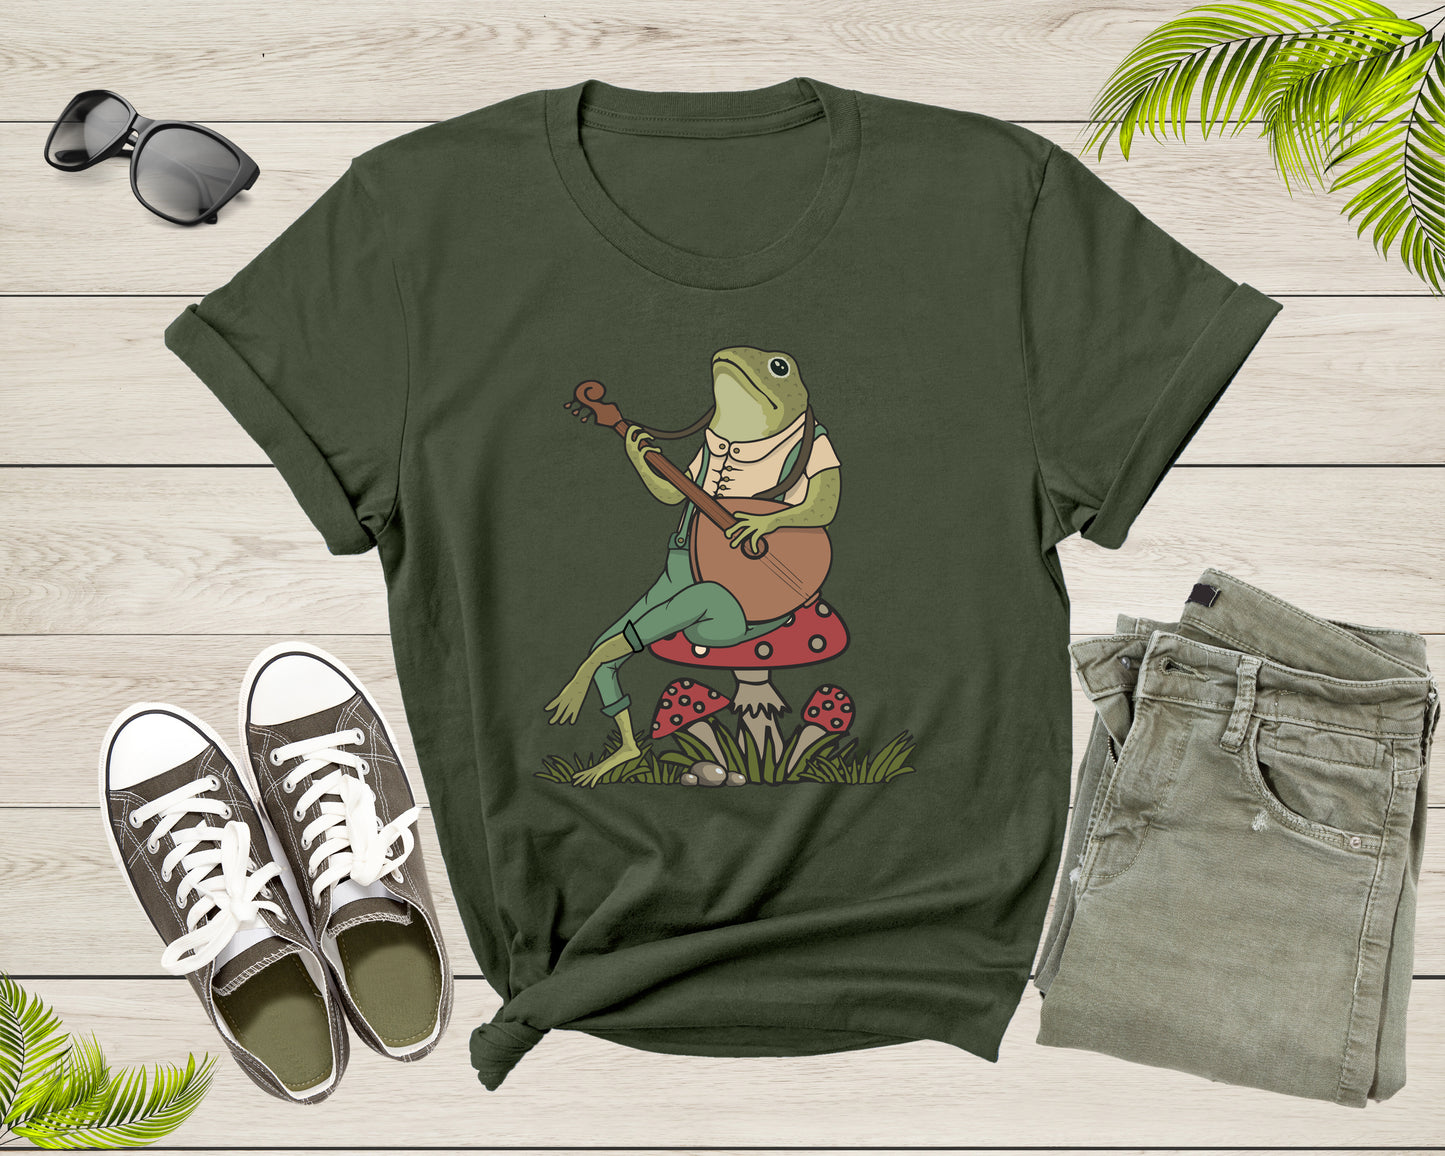 Green Frog Toad Animal Sitting on Mushrooms Playing Music T-Shirt Frog Lover Shirt Frog And Toad Mushroom Shirt Frog Lover Animal Tshirt